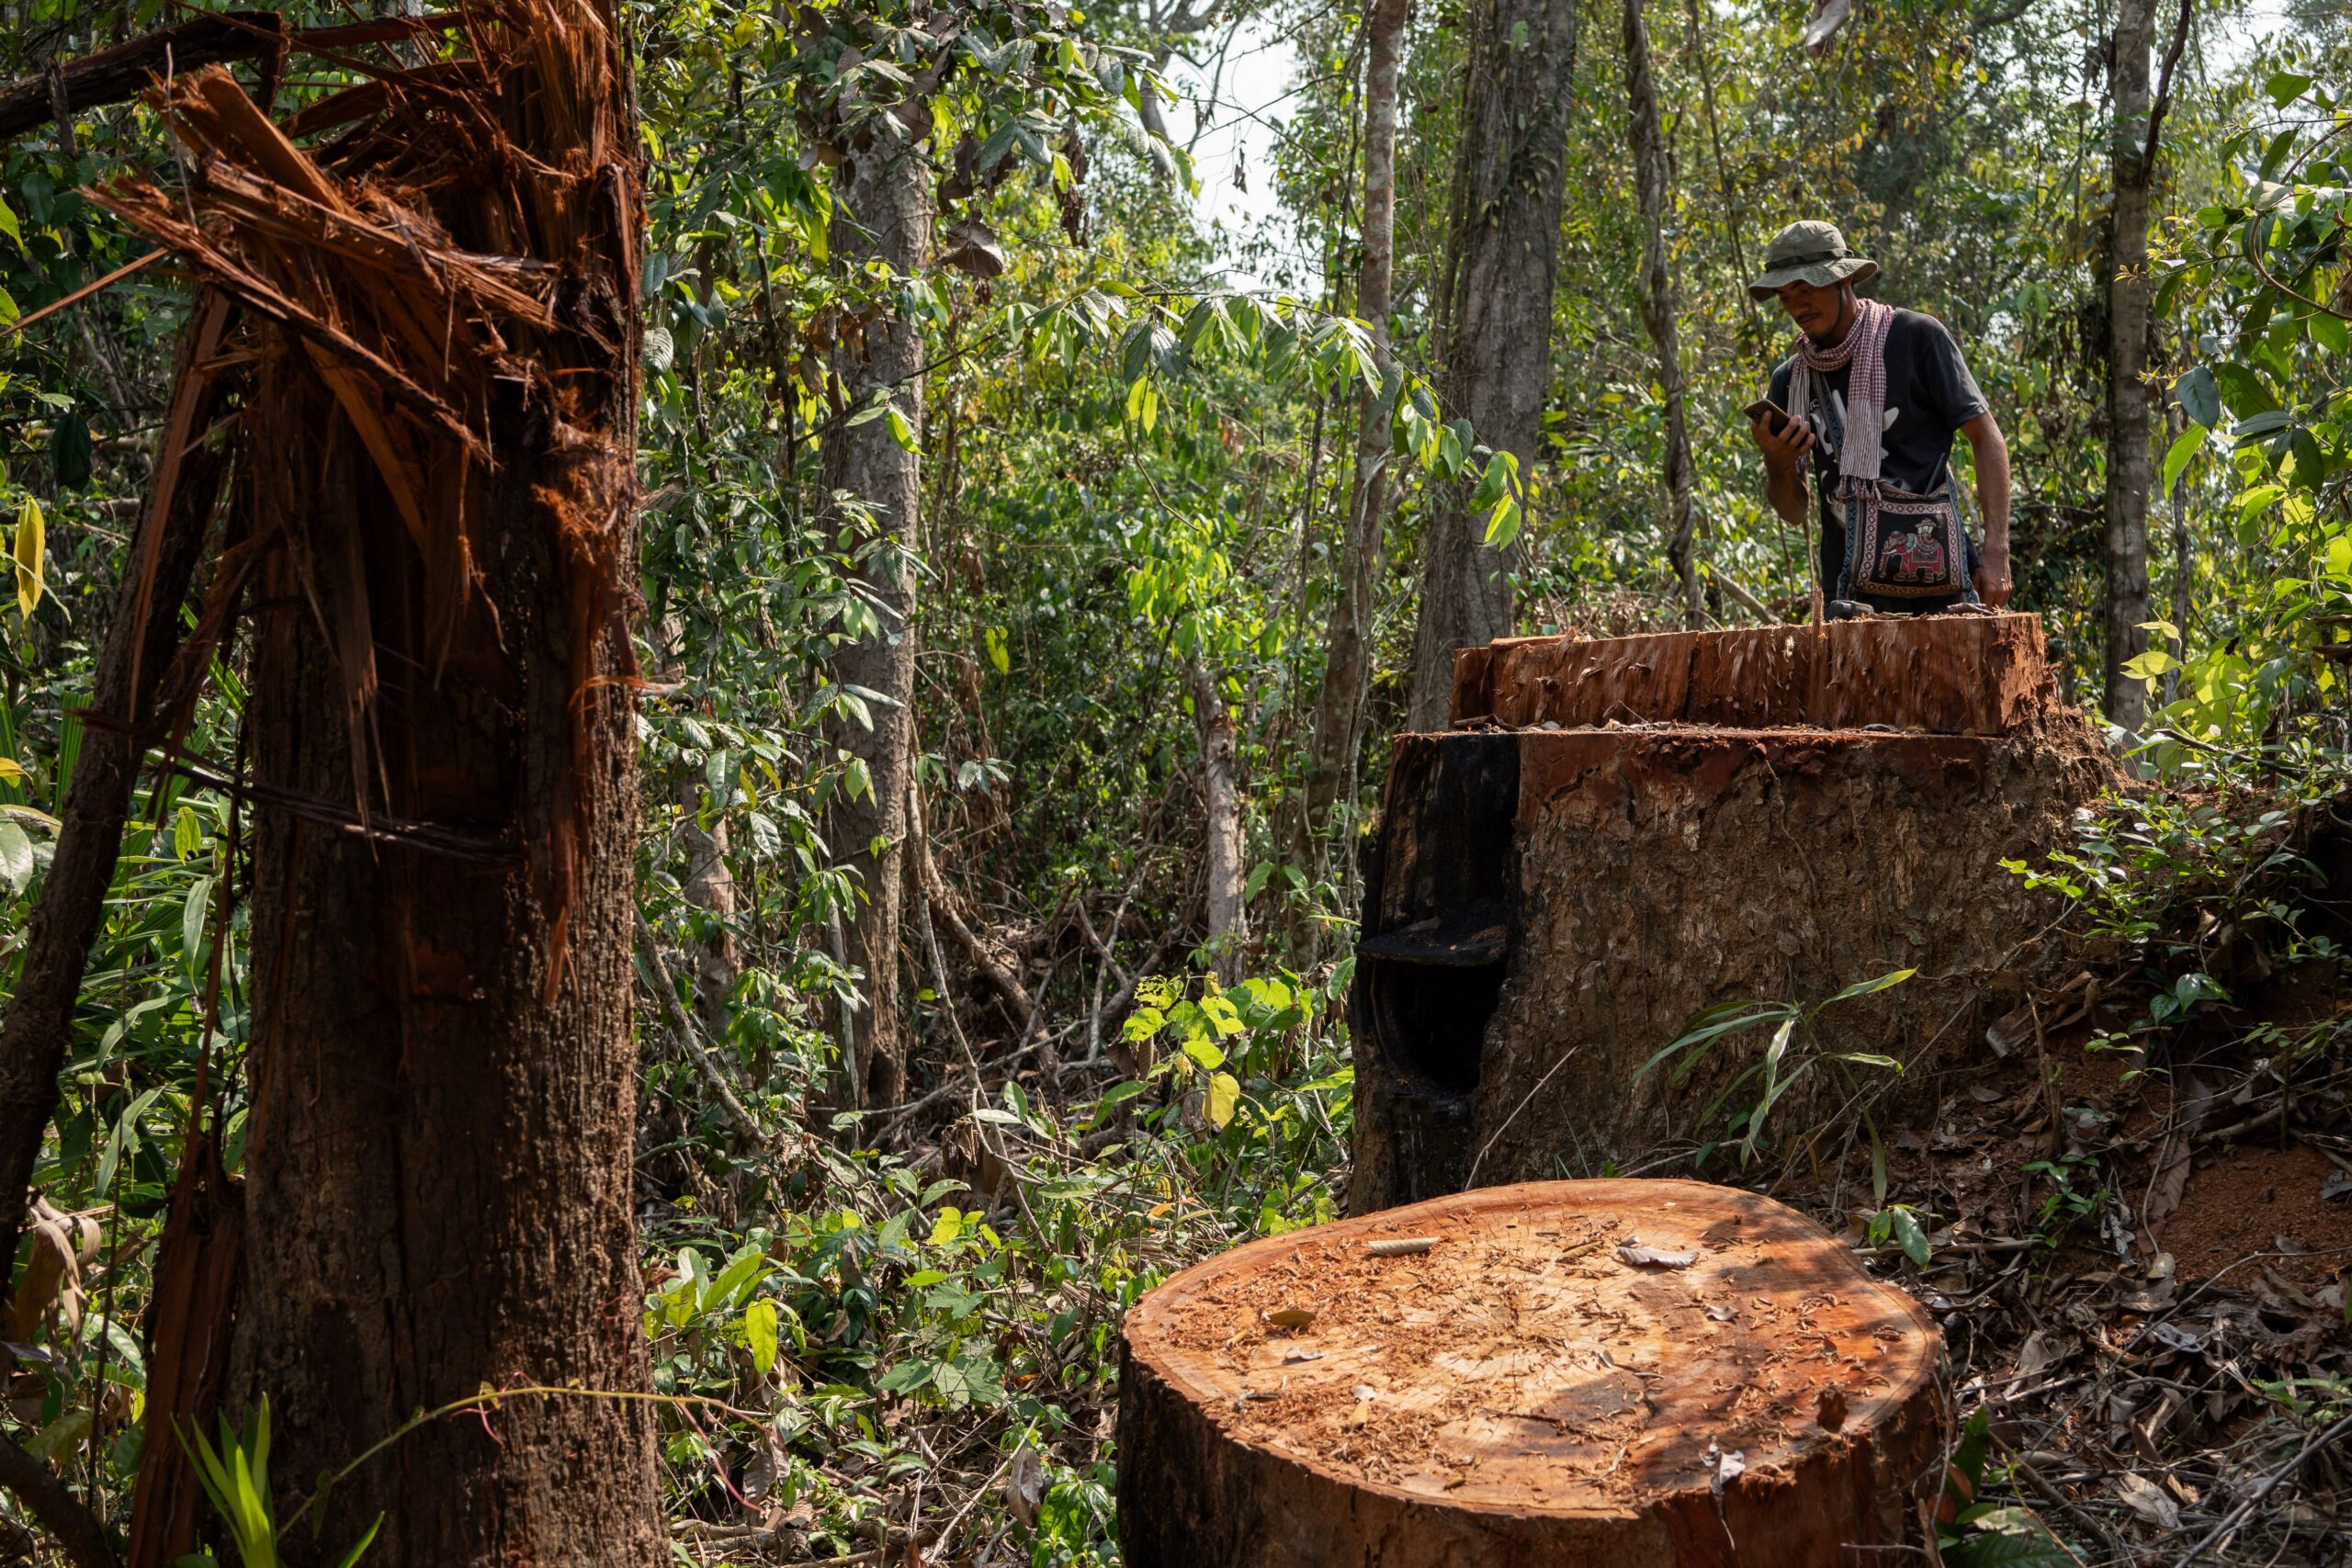 For those who frequently go out on patrol in a bid to defend the protected forest, there is a sense that they are more of a target for government rangers than the loggers committing the forest crimes. Image by Andy Ball / Mongabay.